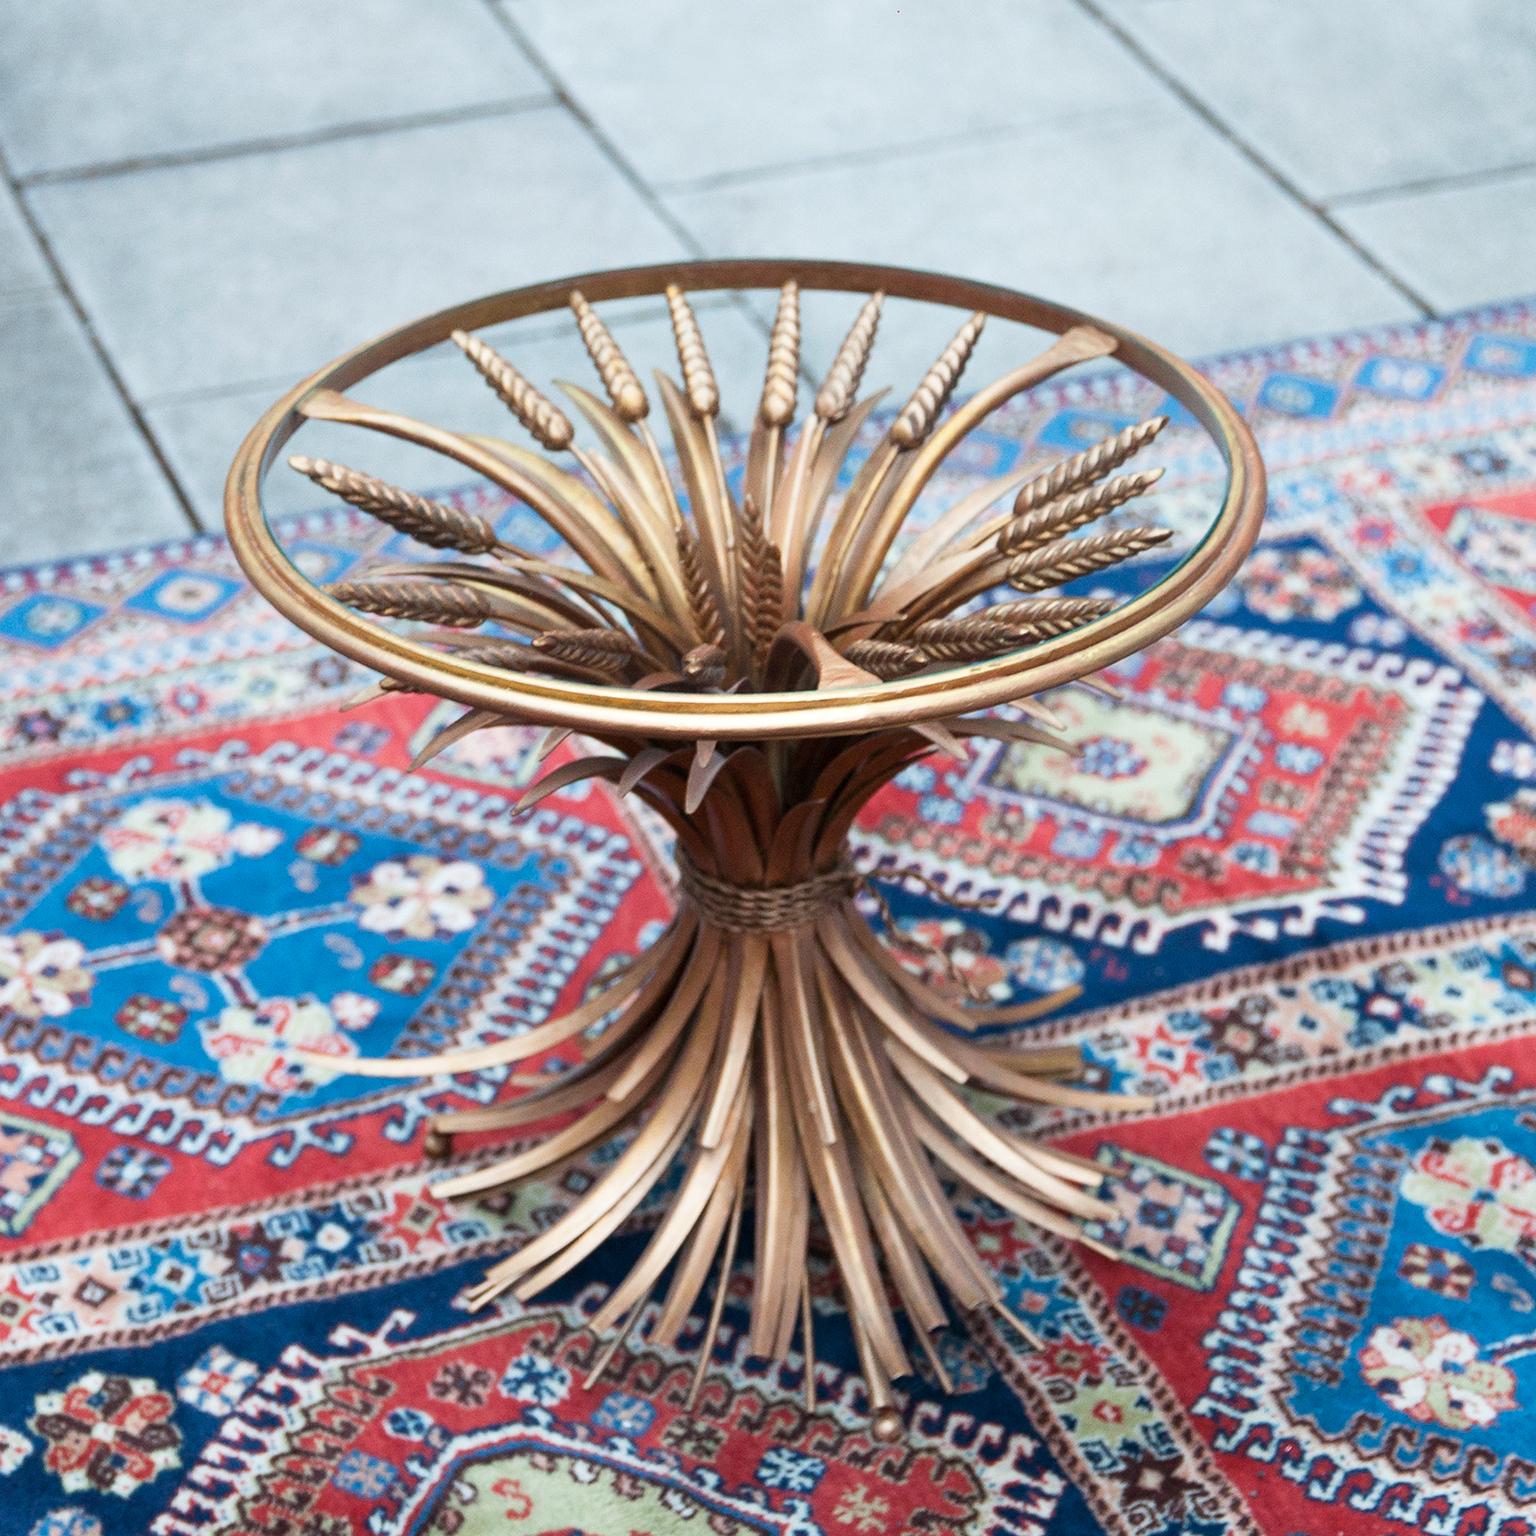 A truly eye-catching original gold-plated metal coffee table. Fashioned in the shape of a wheat sheaf bound by string and a perfect round glass top embossed in a golden metal rim. This table is a really old piece in original shape with the perfect